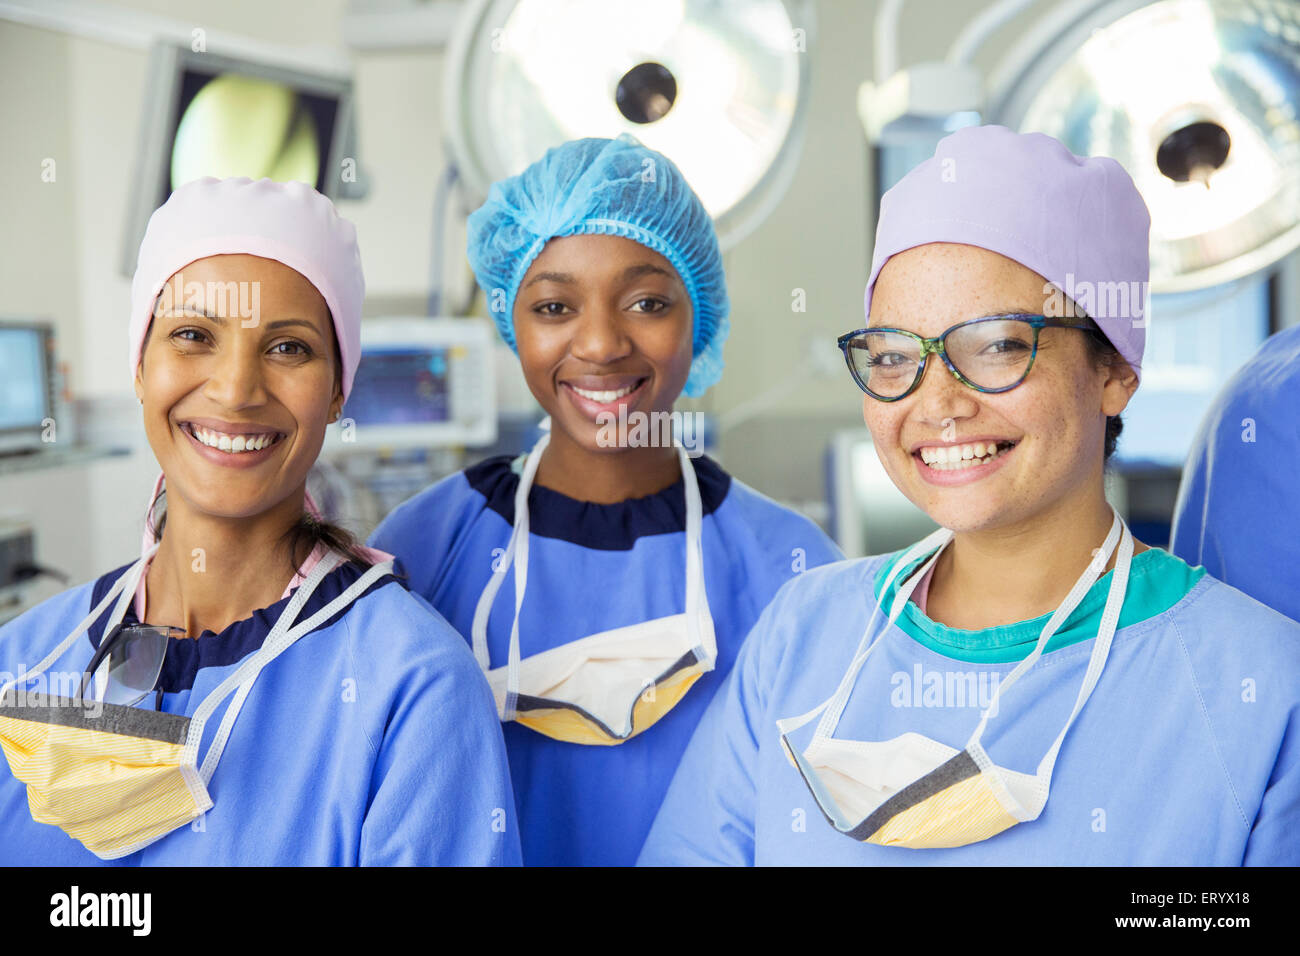 Portrait of smiling female surgeons in operating room Banque D'Images